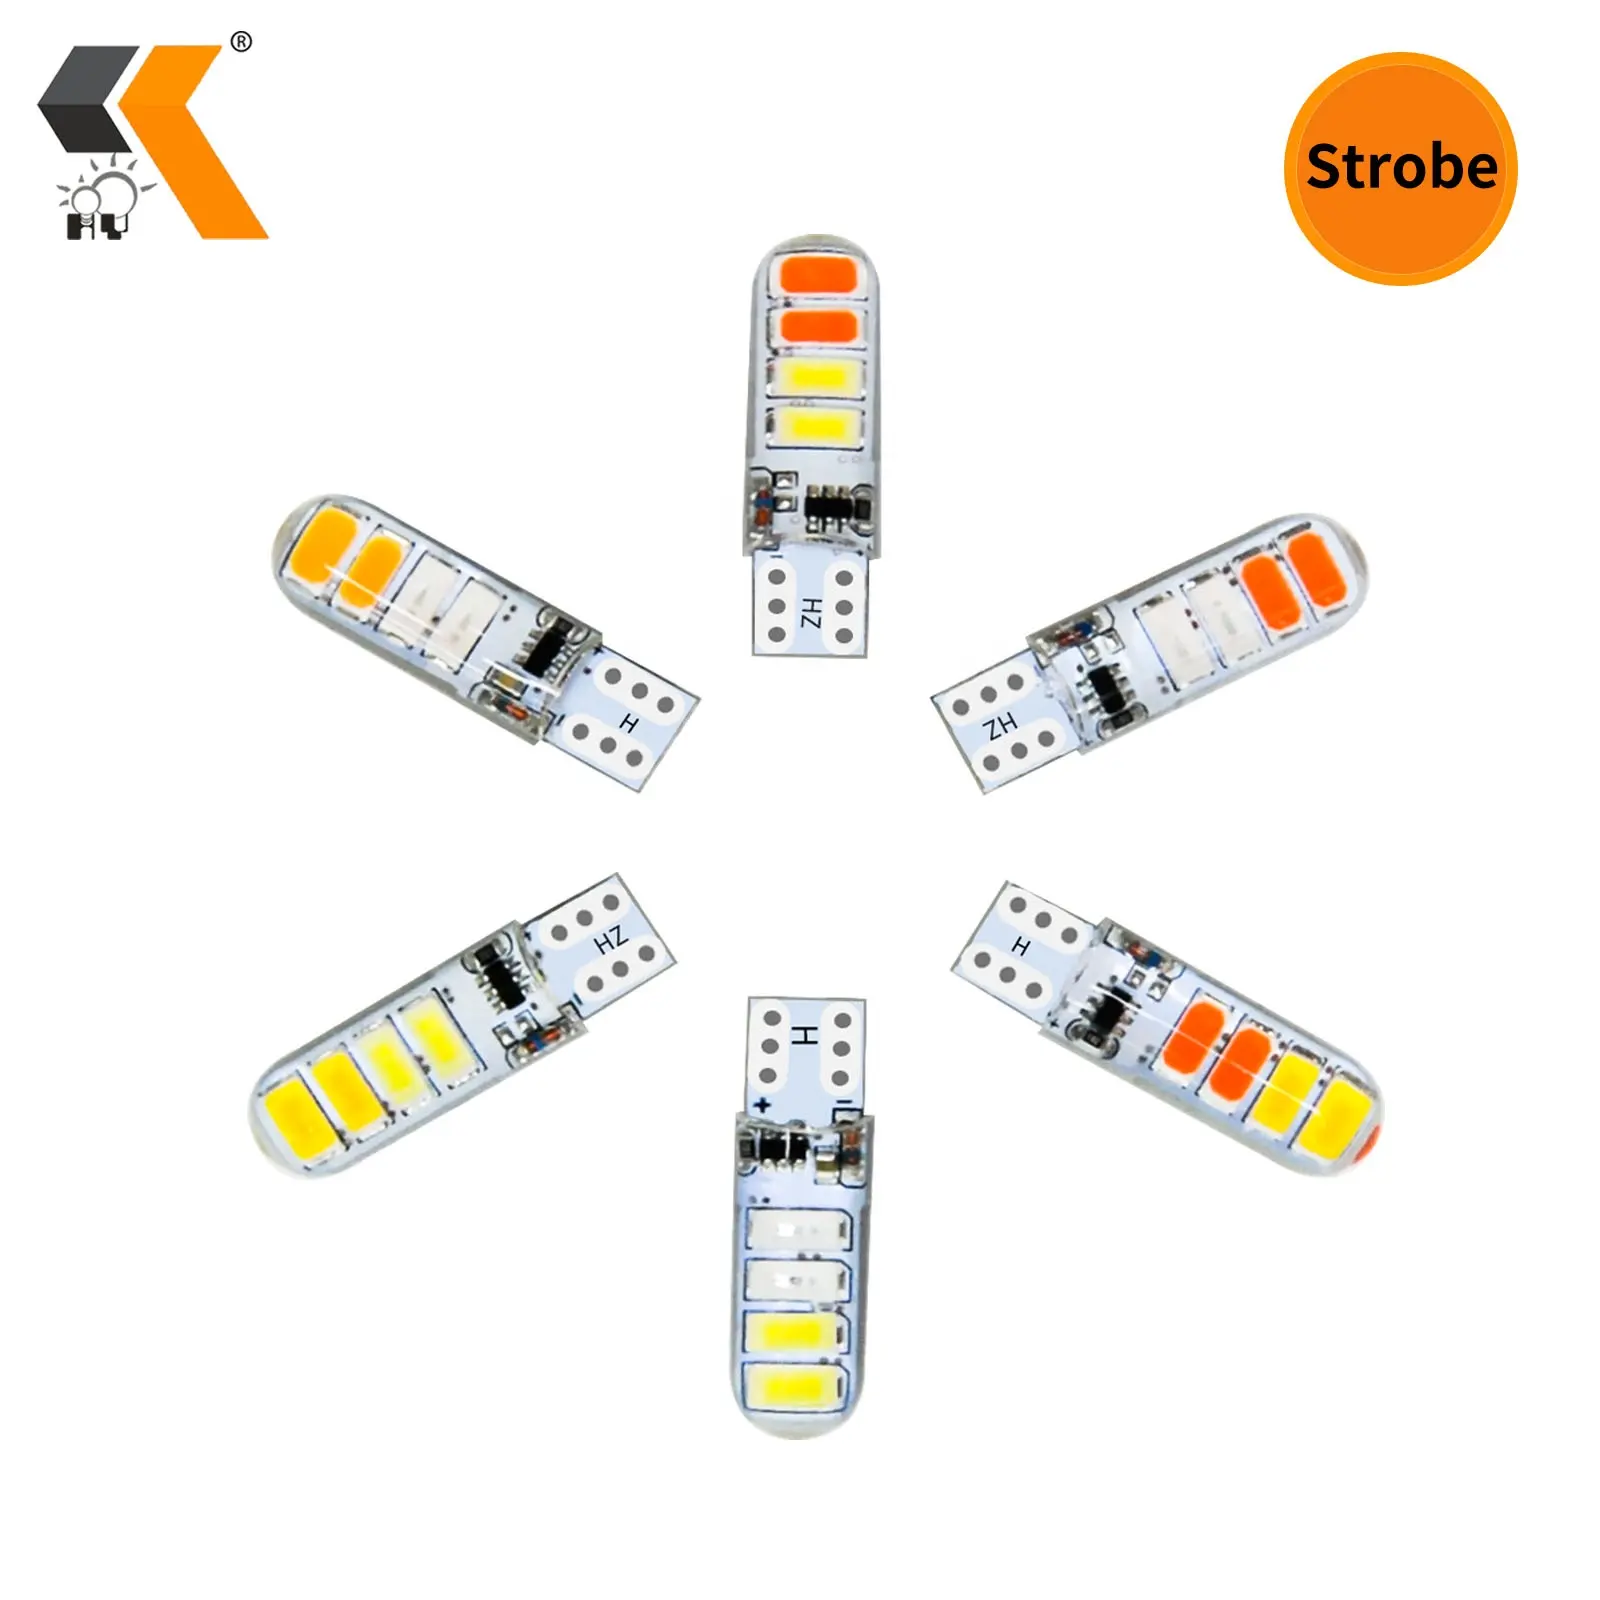 HOLY Strobe Flash Car 8SMD Silicone LED Light Dome light Parking License Plate lamp No Error Dual Color T10 w5w 194 LED Canbus